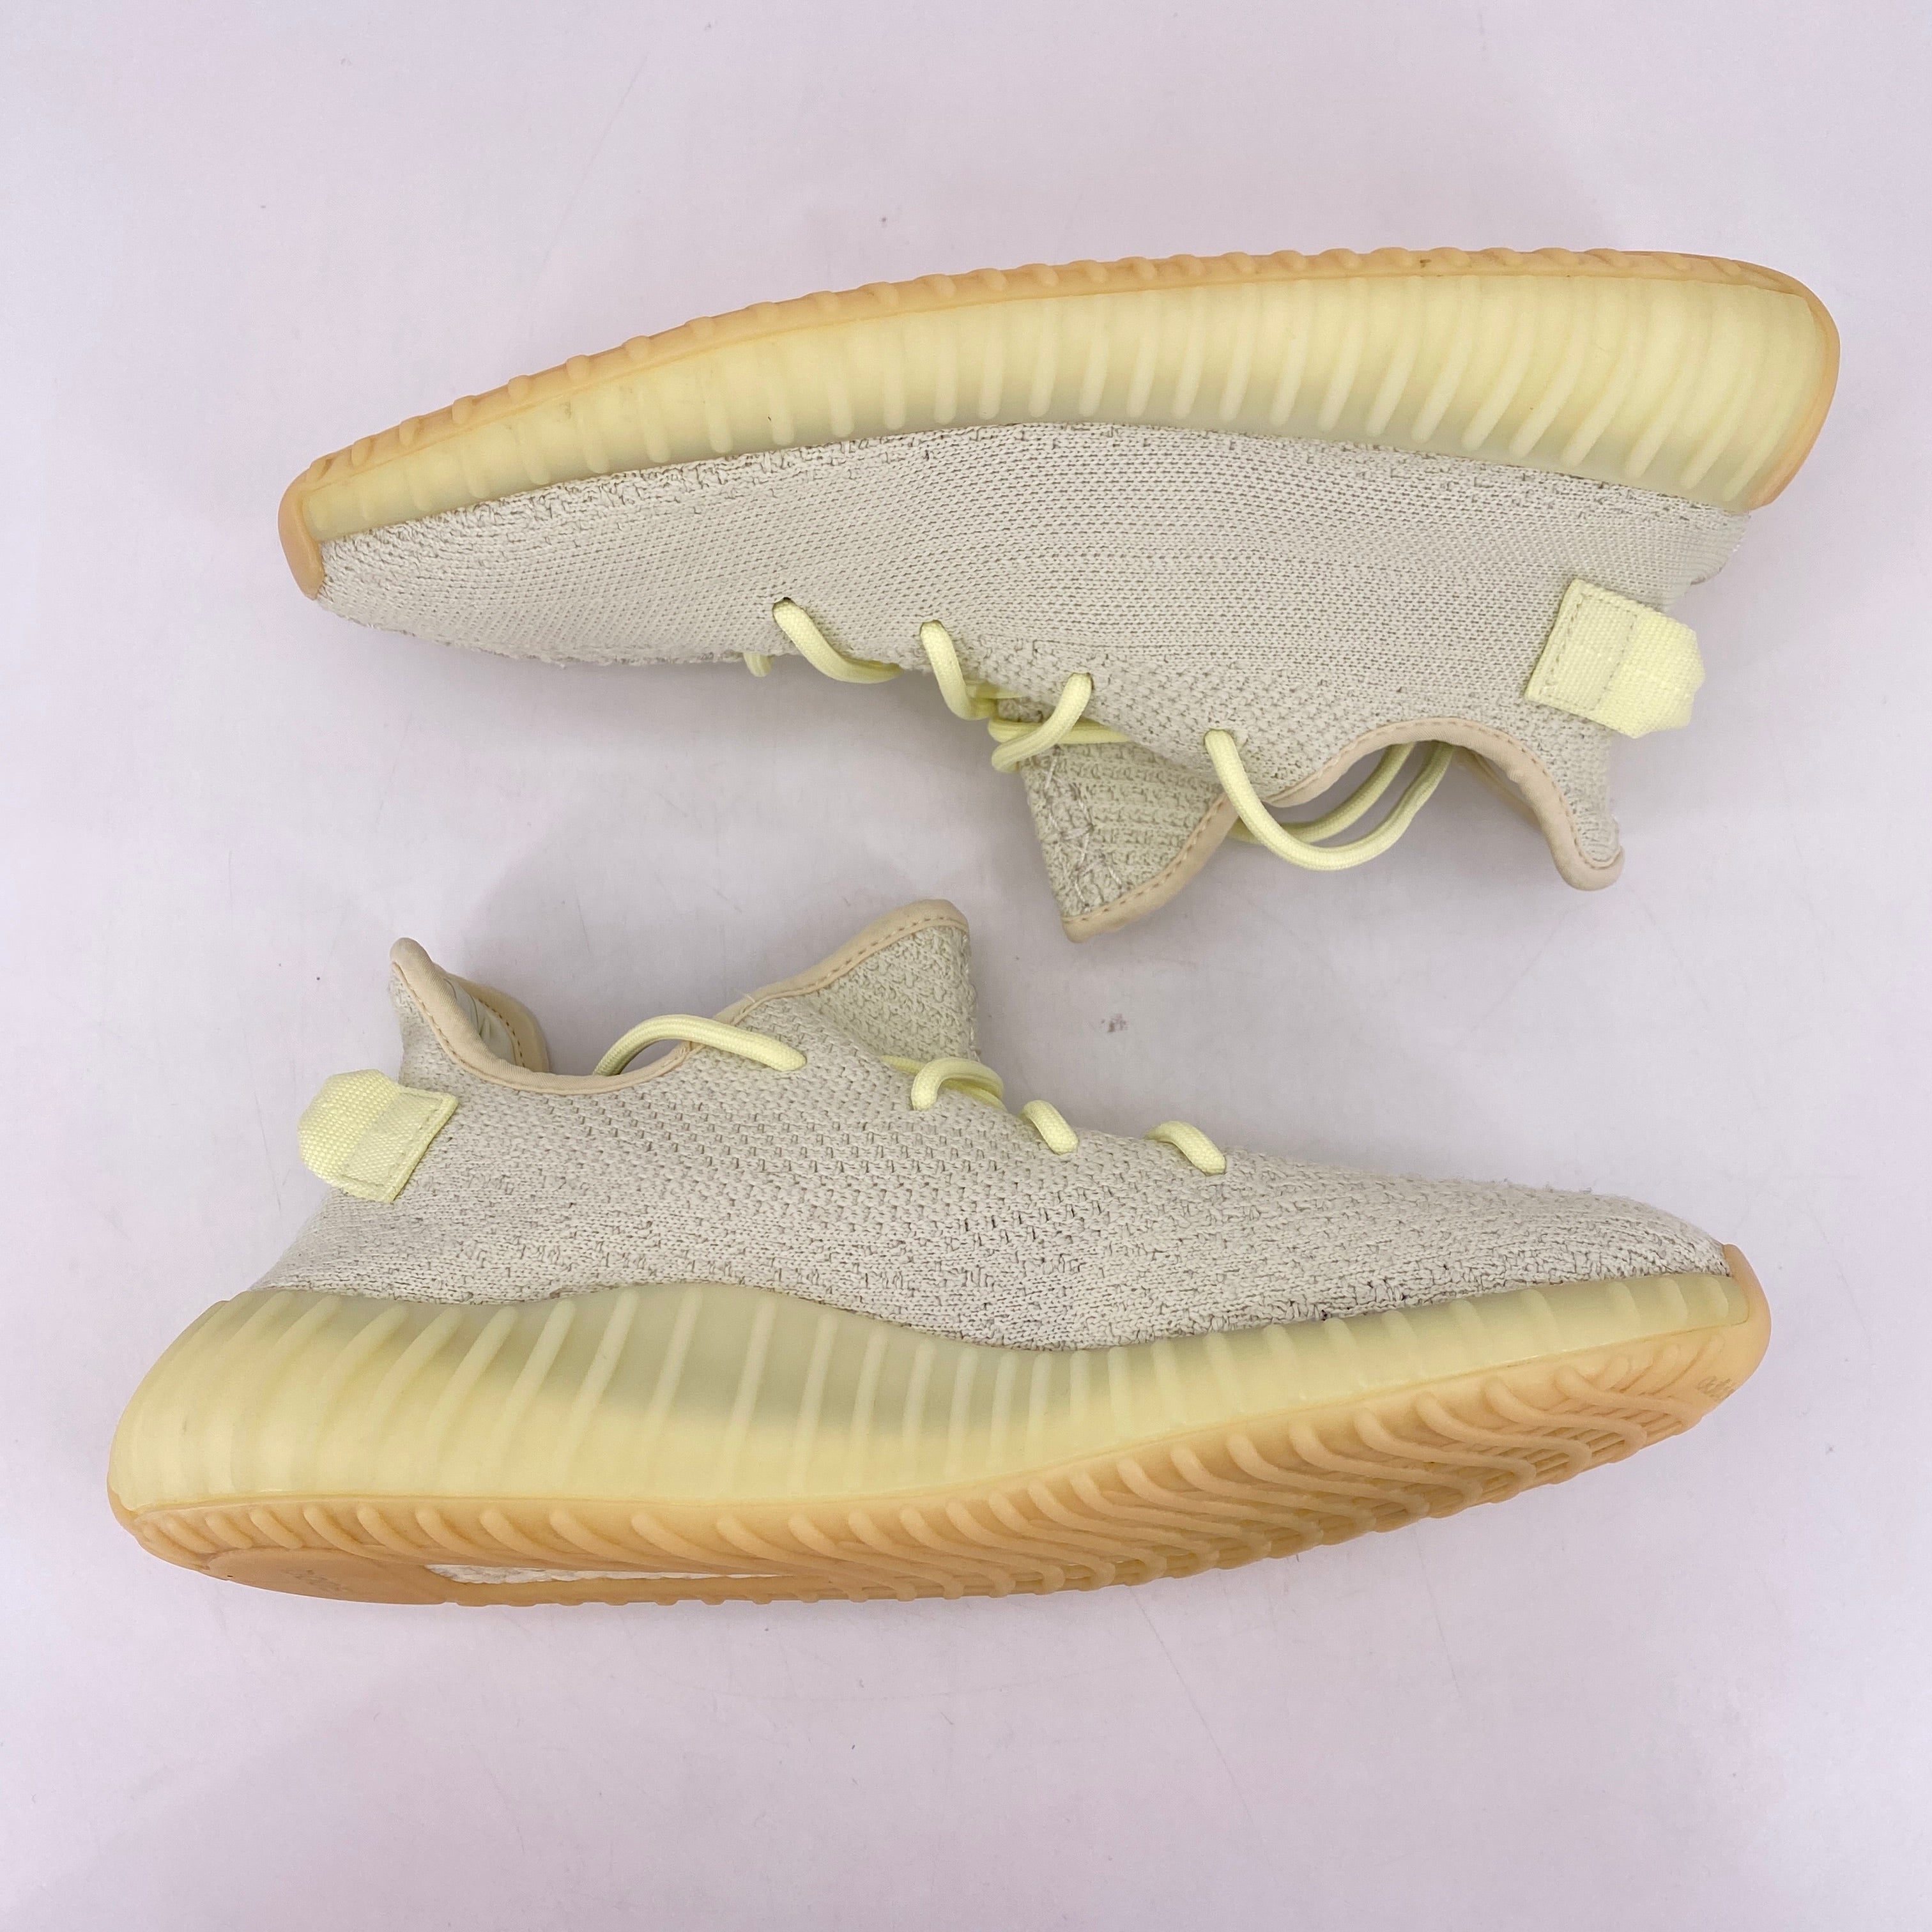 Yeezy 350 v2 &quot;Butter&quot; 2018 Used Size 10